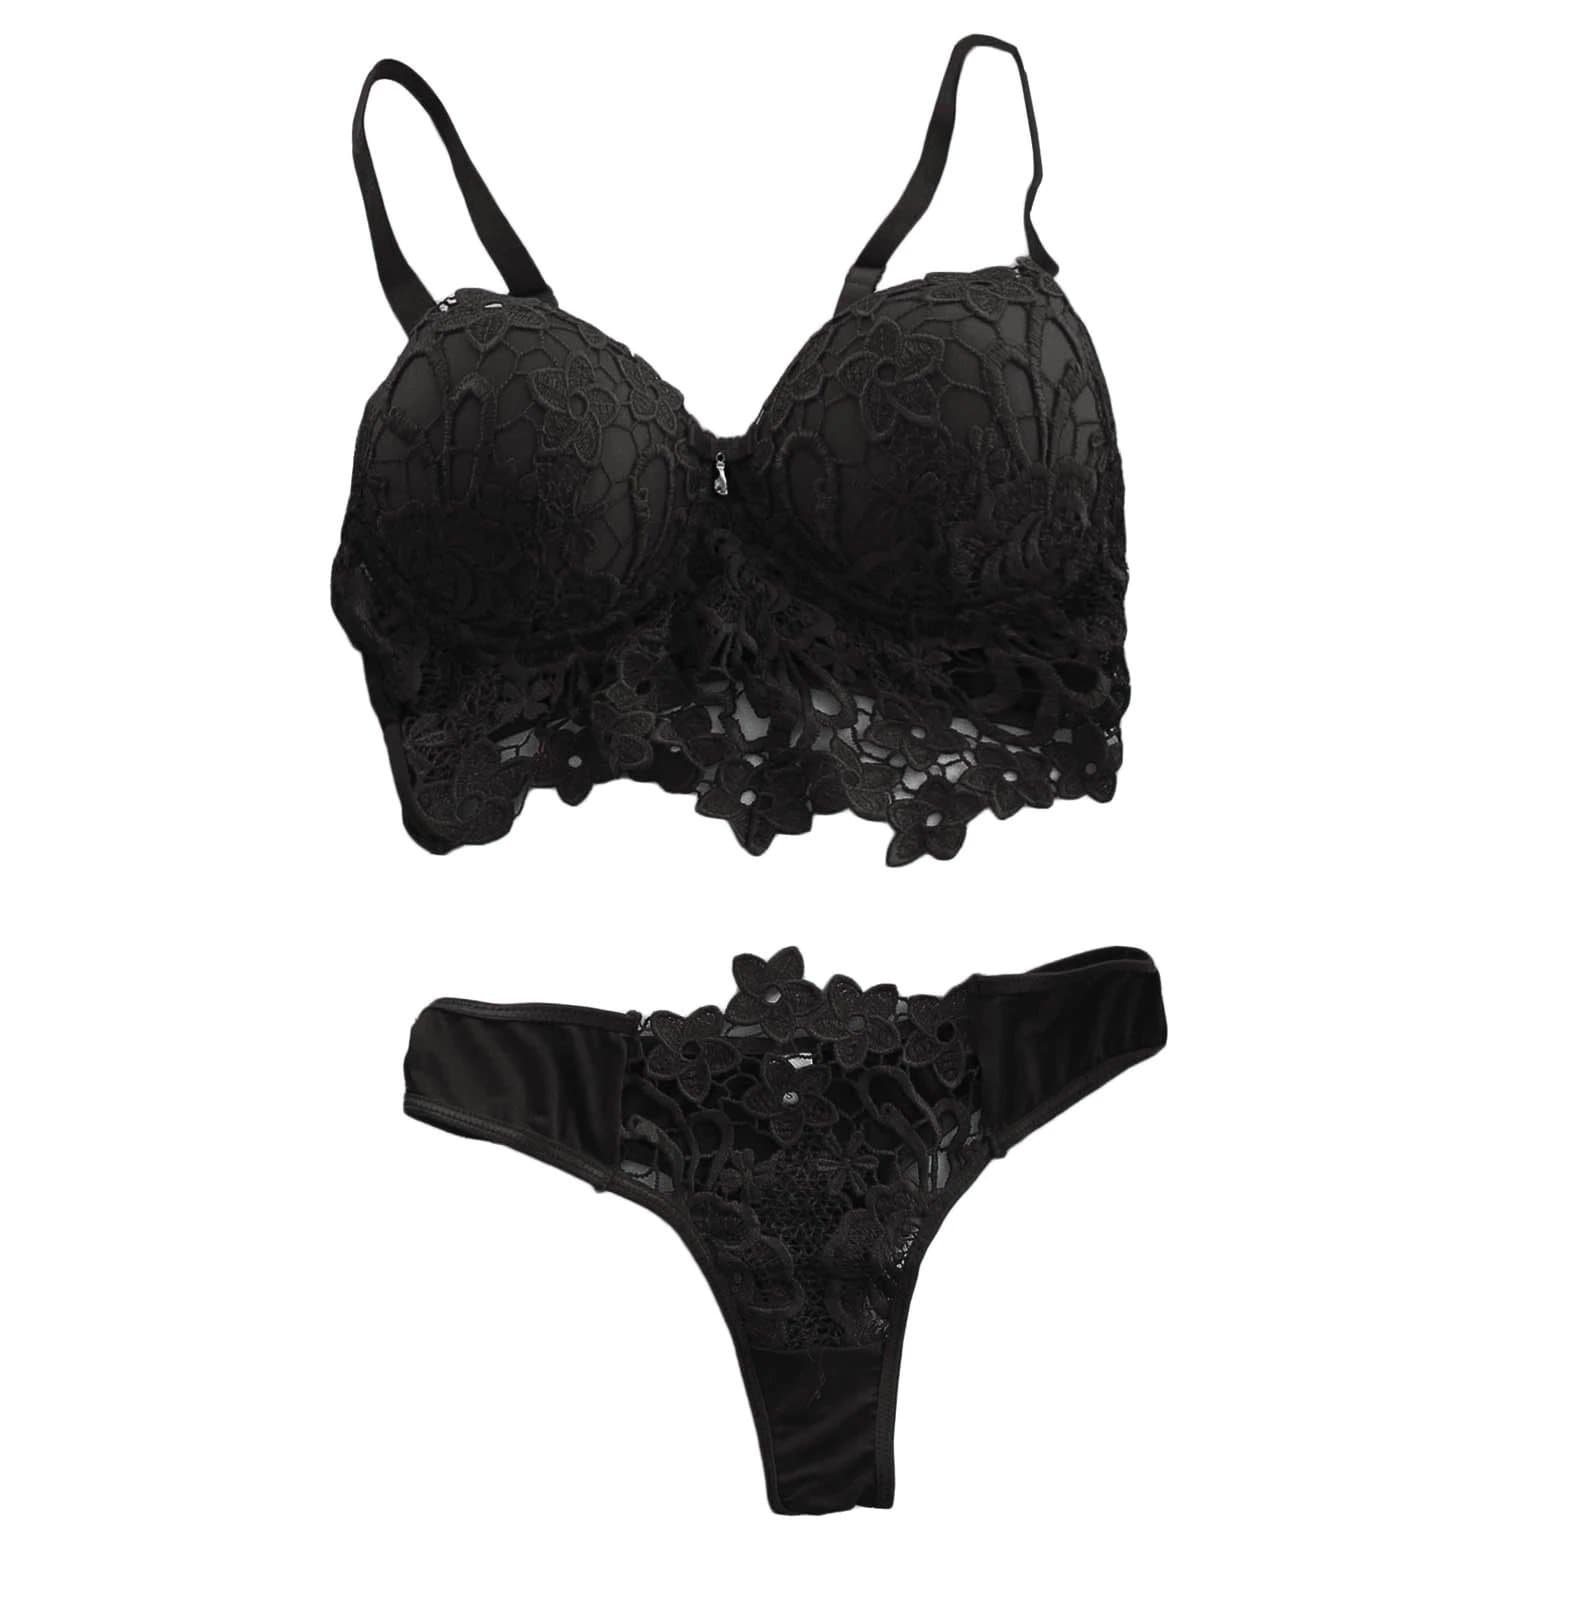 Embroidered Sexy Fine Lingerie | Fetish Lingerie - Gothic Babe Co